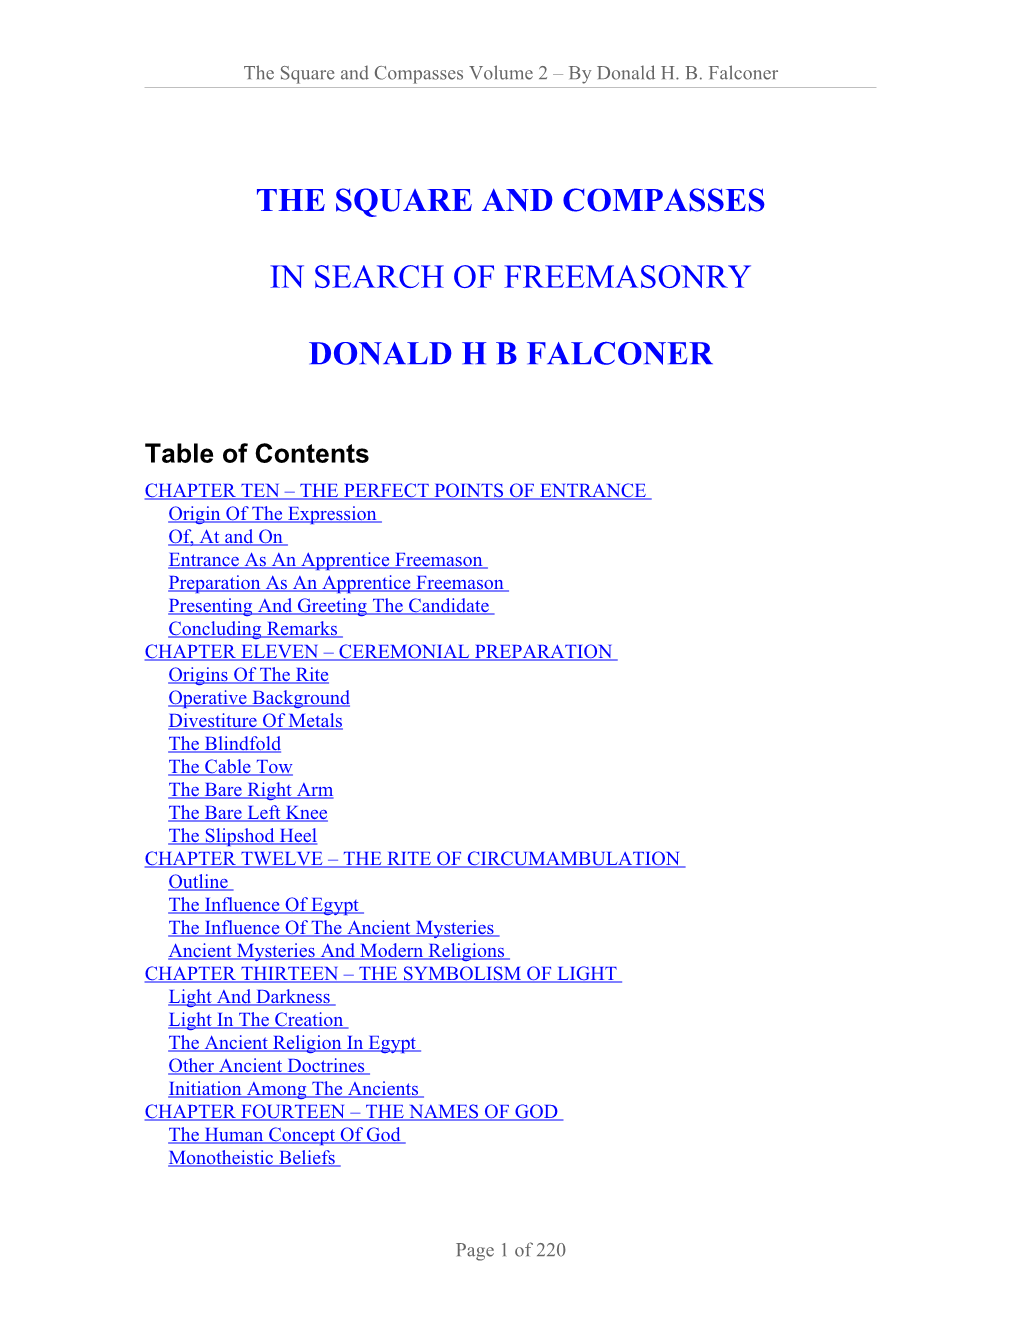 The Square and Compasses Volume 2 – by Donald H